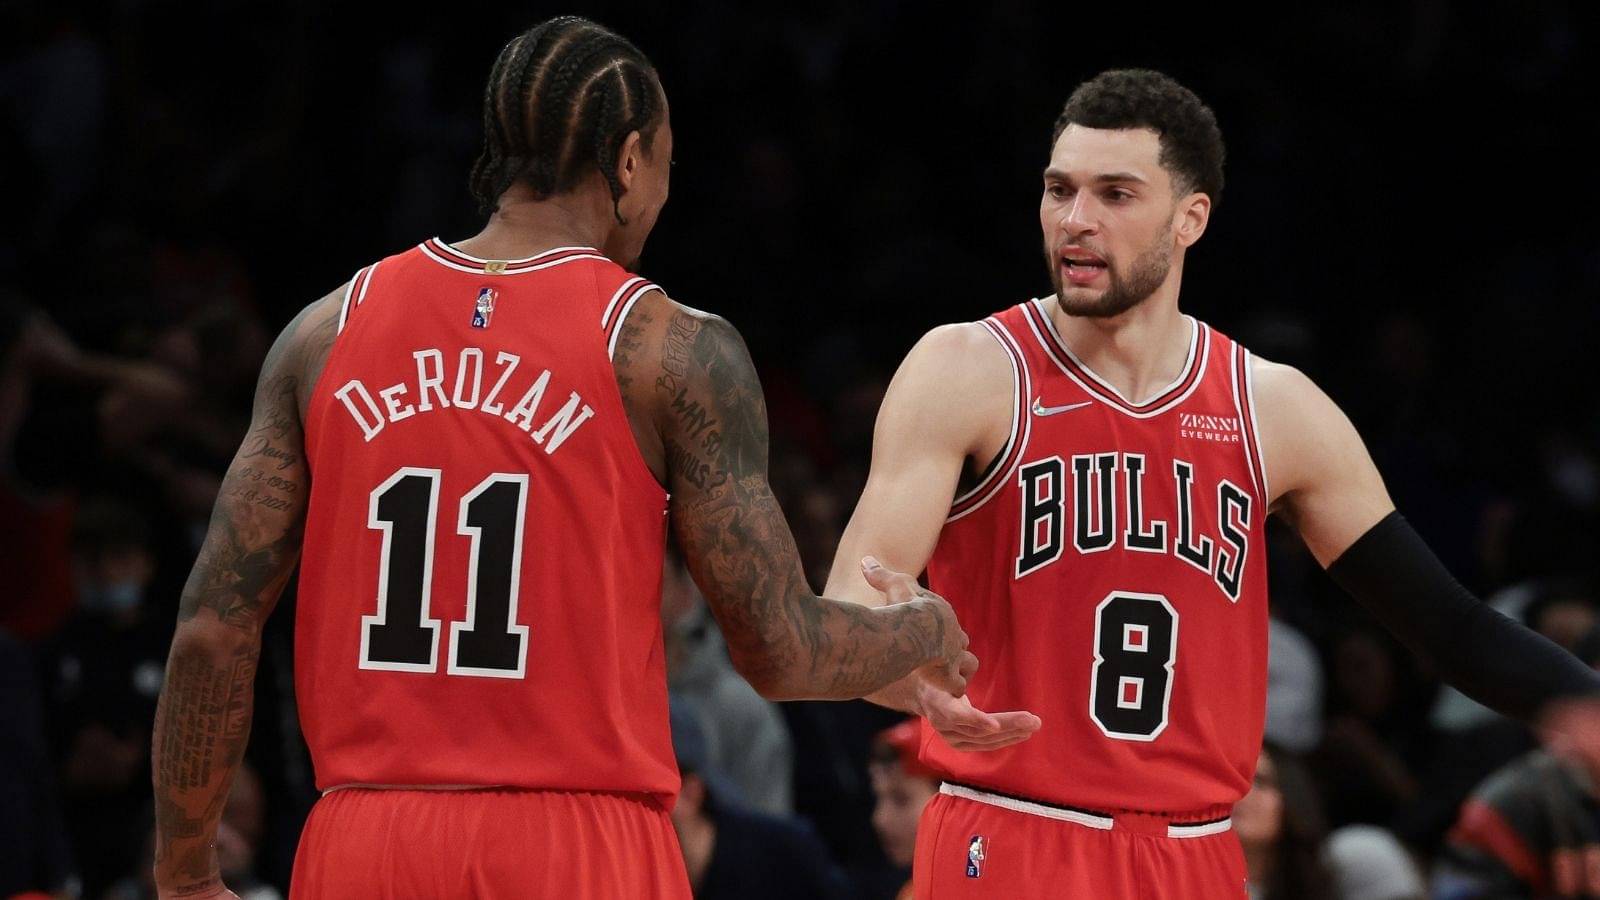 "As bad as I know he wants to play, LaVine has gotta take care of his body!": DeMar DeRozan is ready to lead the shorthanded Bulls, suggests his All-Star partner to take a breather